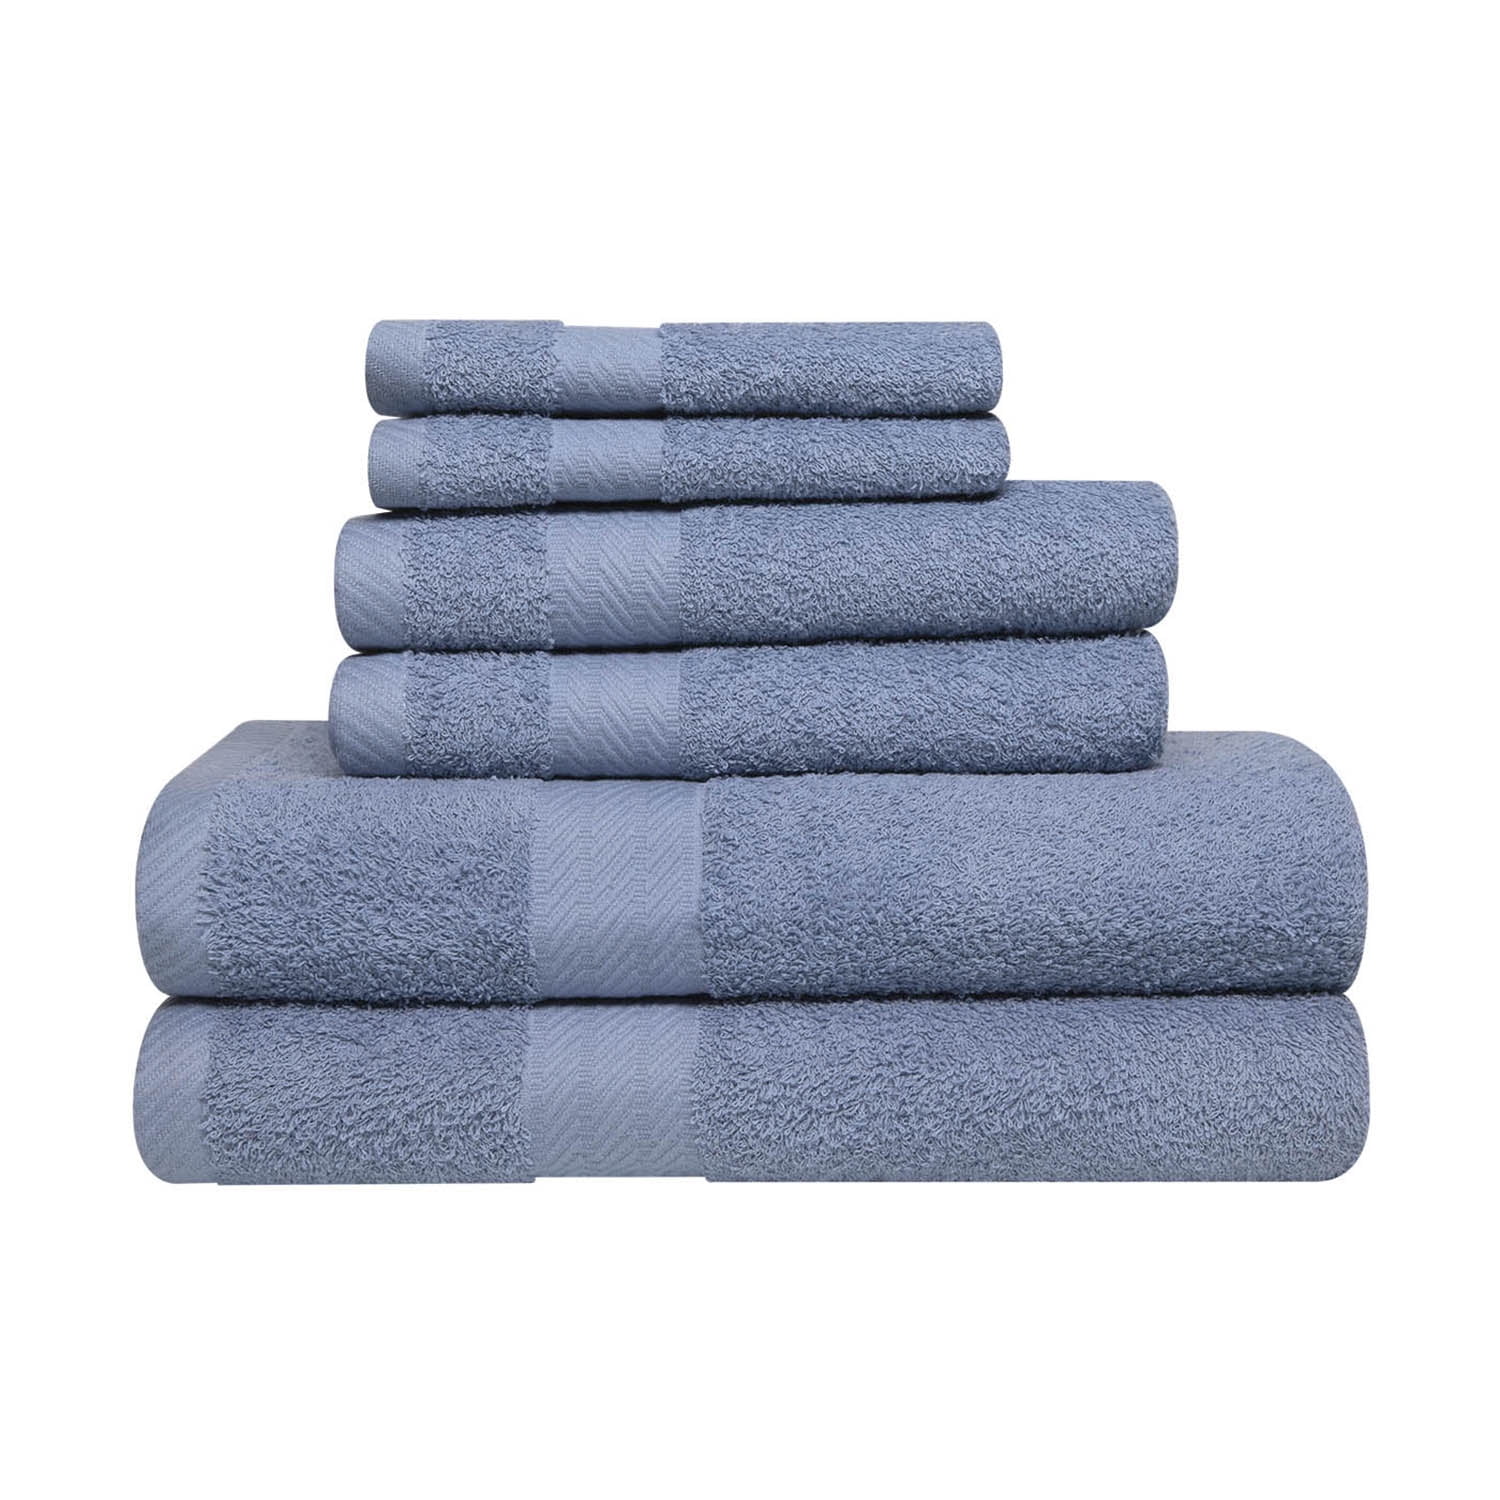 100%  Bamboo Fiber Rayon Towel Ultra Soft Absorbent  Cotton Edge Colors Solid 